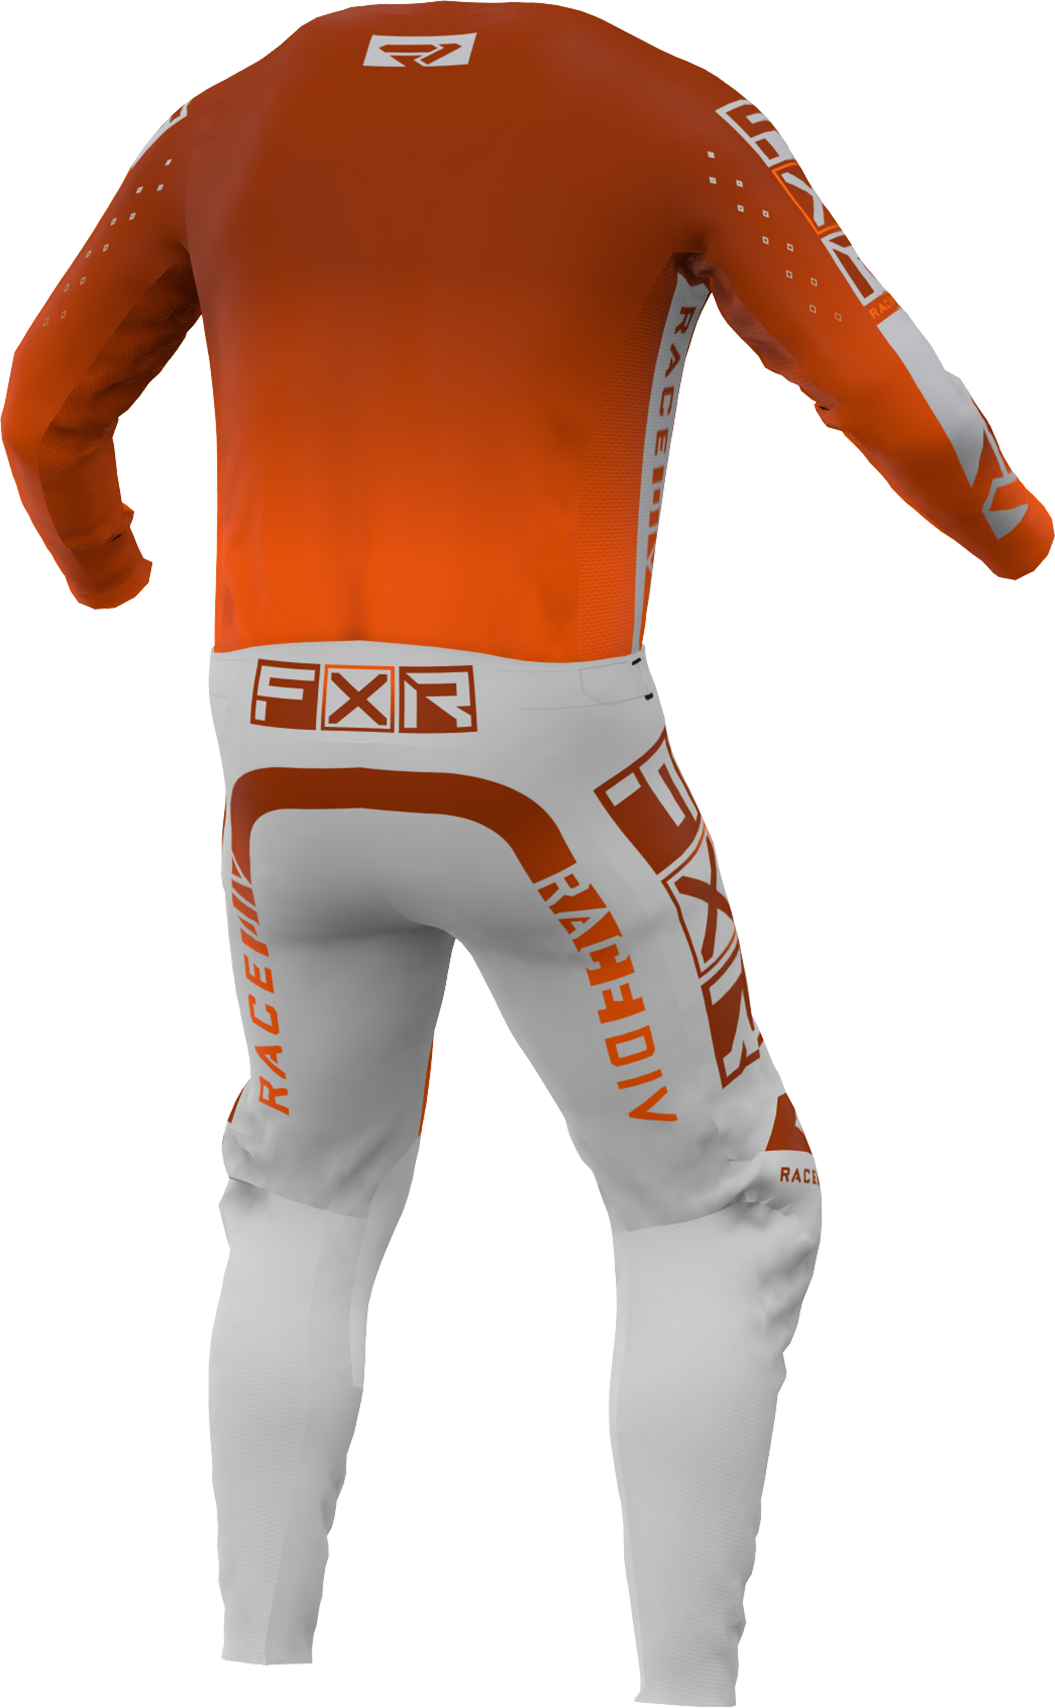 A 3D image of FXR's Podium Pro MX Jersey and Pant in Orange Crush colorway